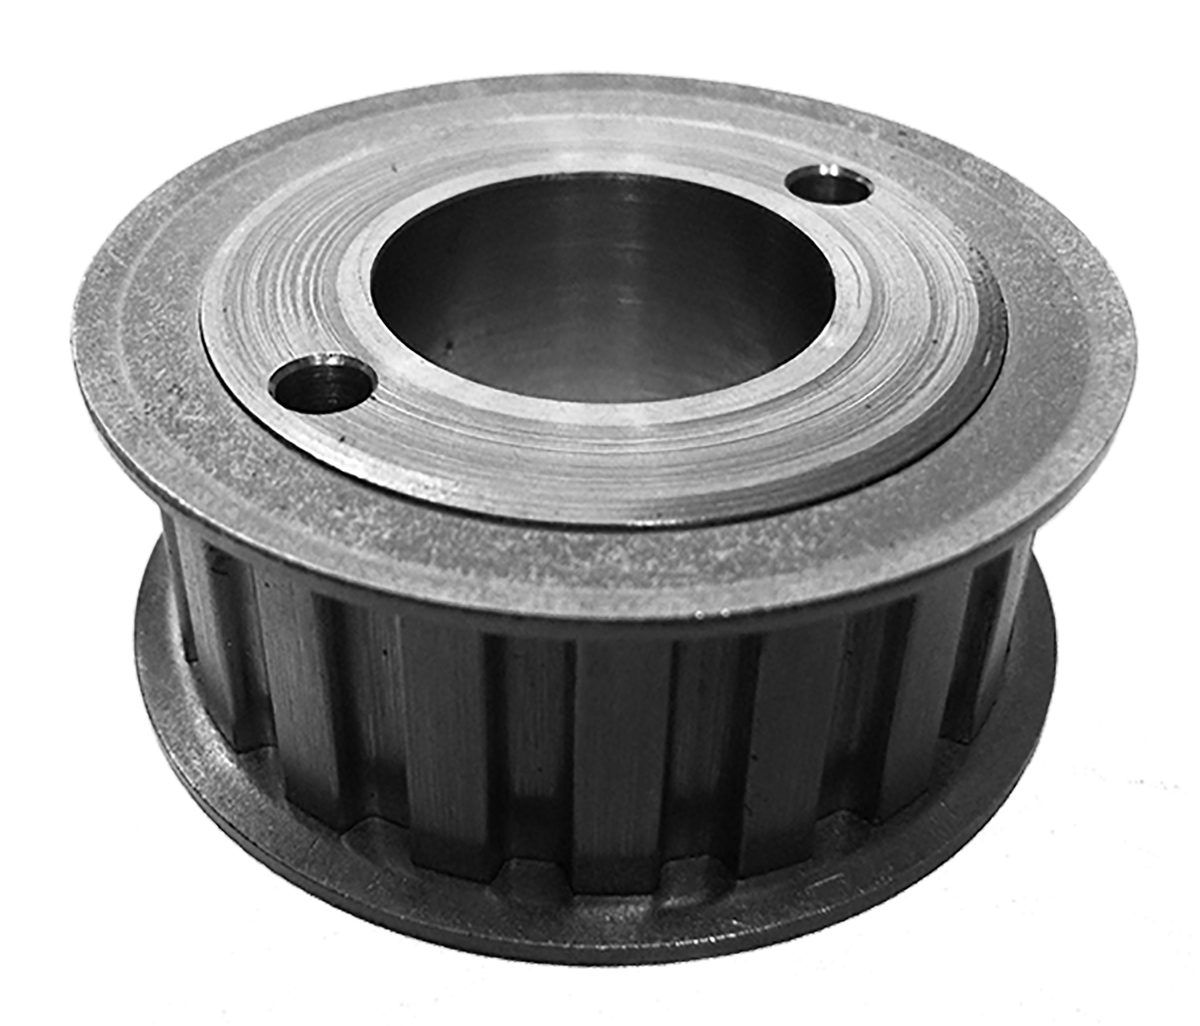 30LH075 - Cast Iron Imperial Pitch Pulleys